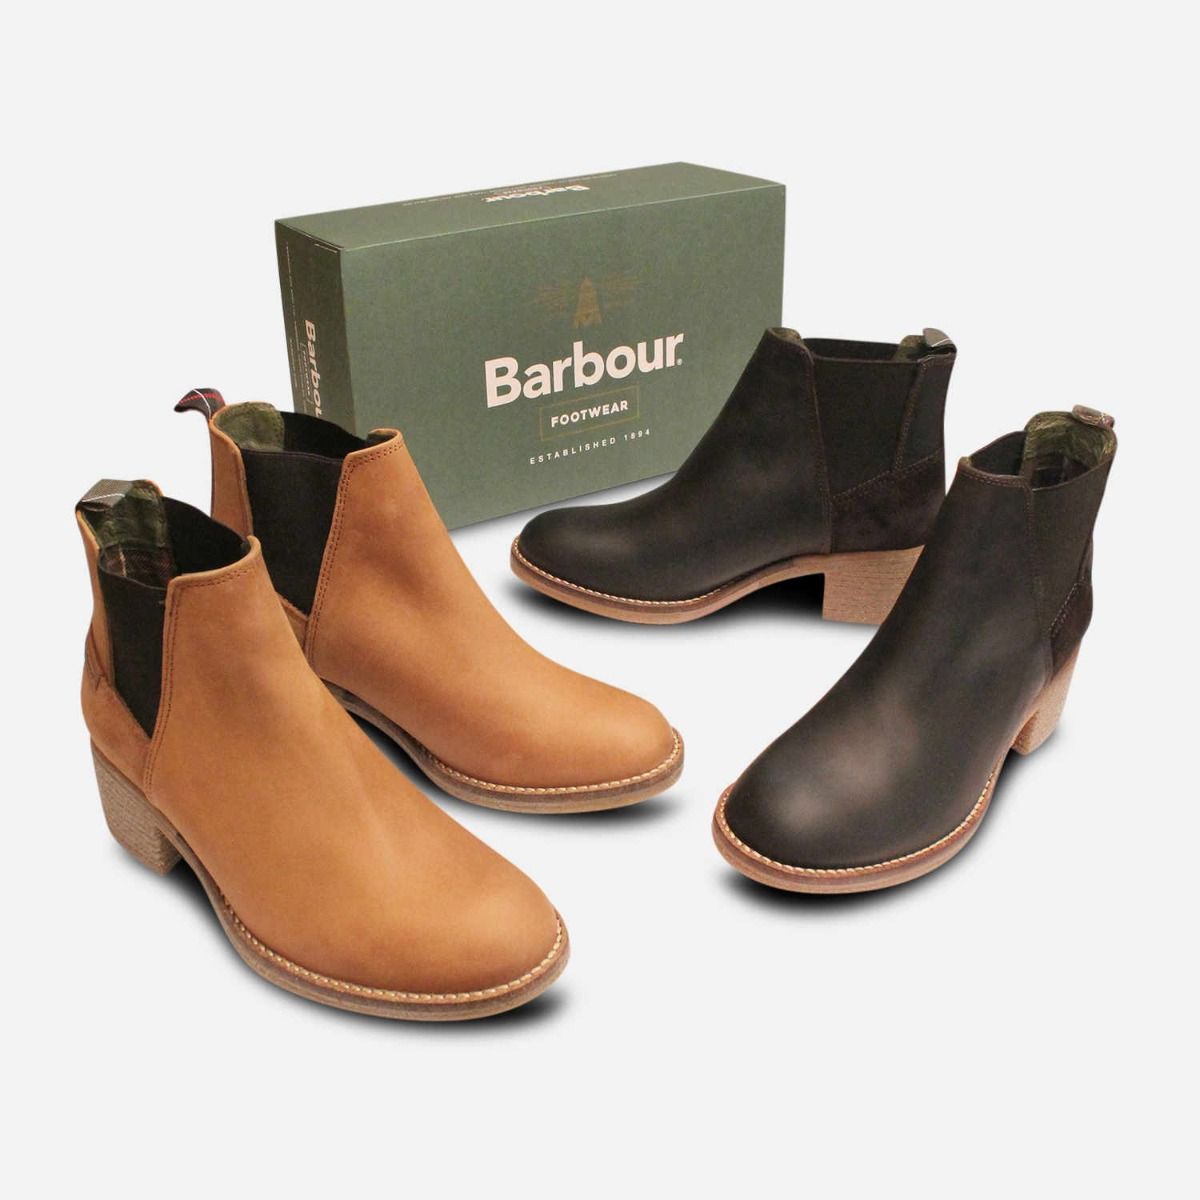 Barbour Keren Ankle Heeled Boots in 